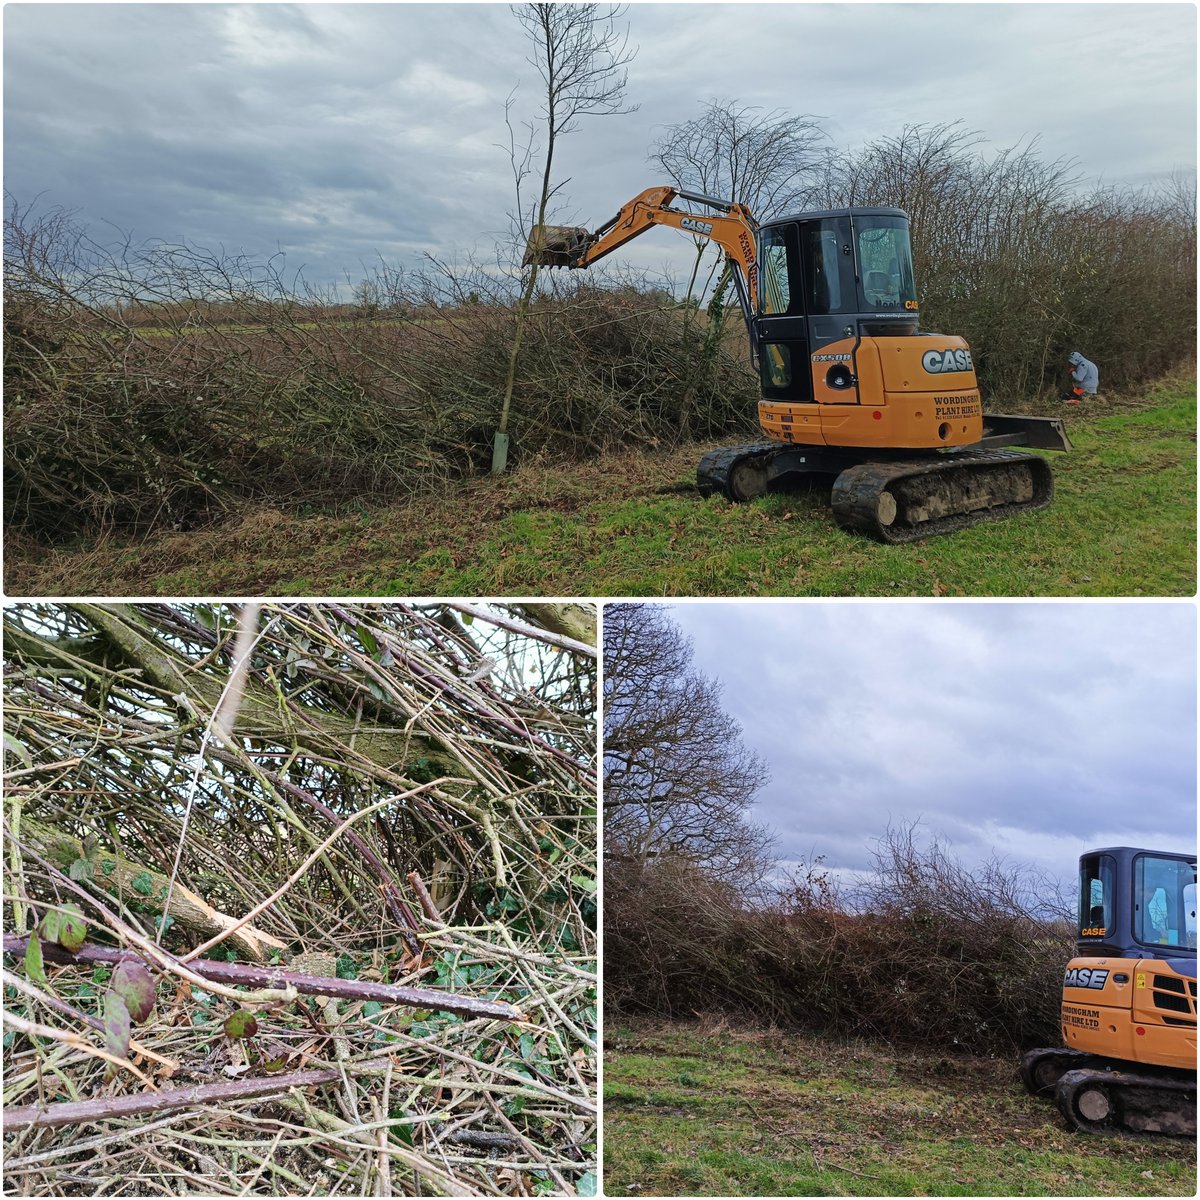 A hybrid of #conservation hedgelaying & coppicing - mechanical laying involves part cutting of the stem with the digger doing the heavy work to push the brash over. The new shoots are then protected from deer & hare & the hedge still blossoms with flowers & fruit in Spring.